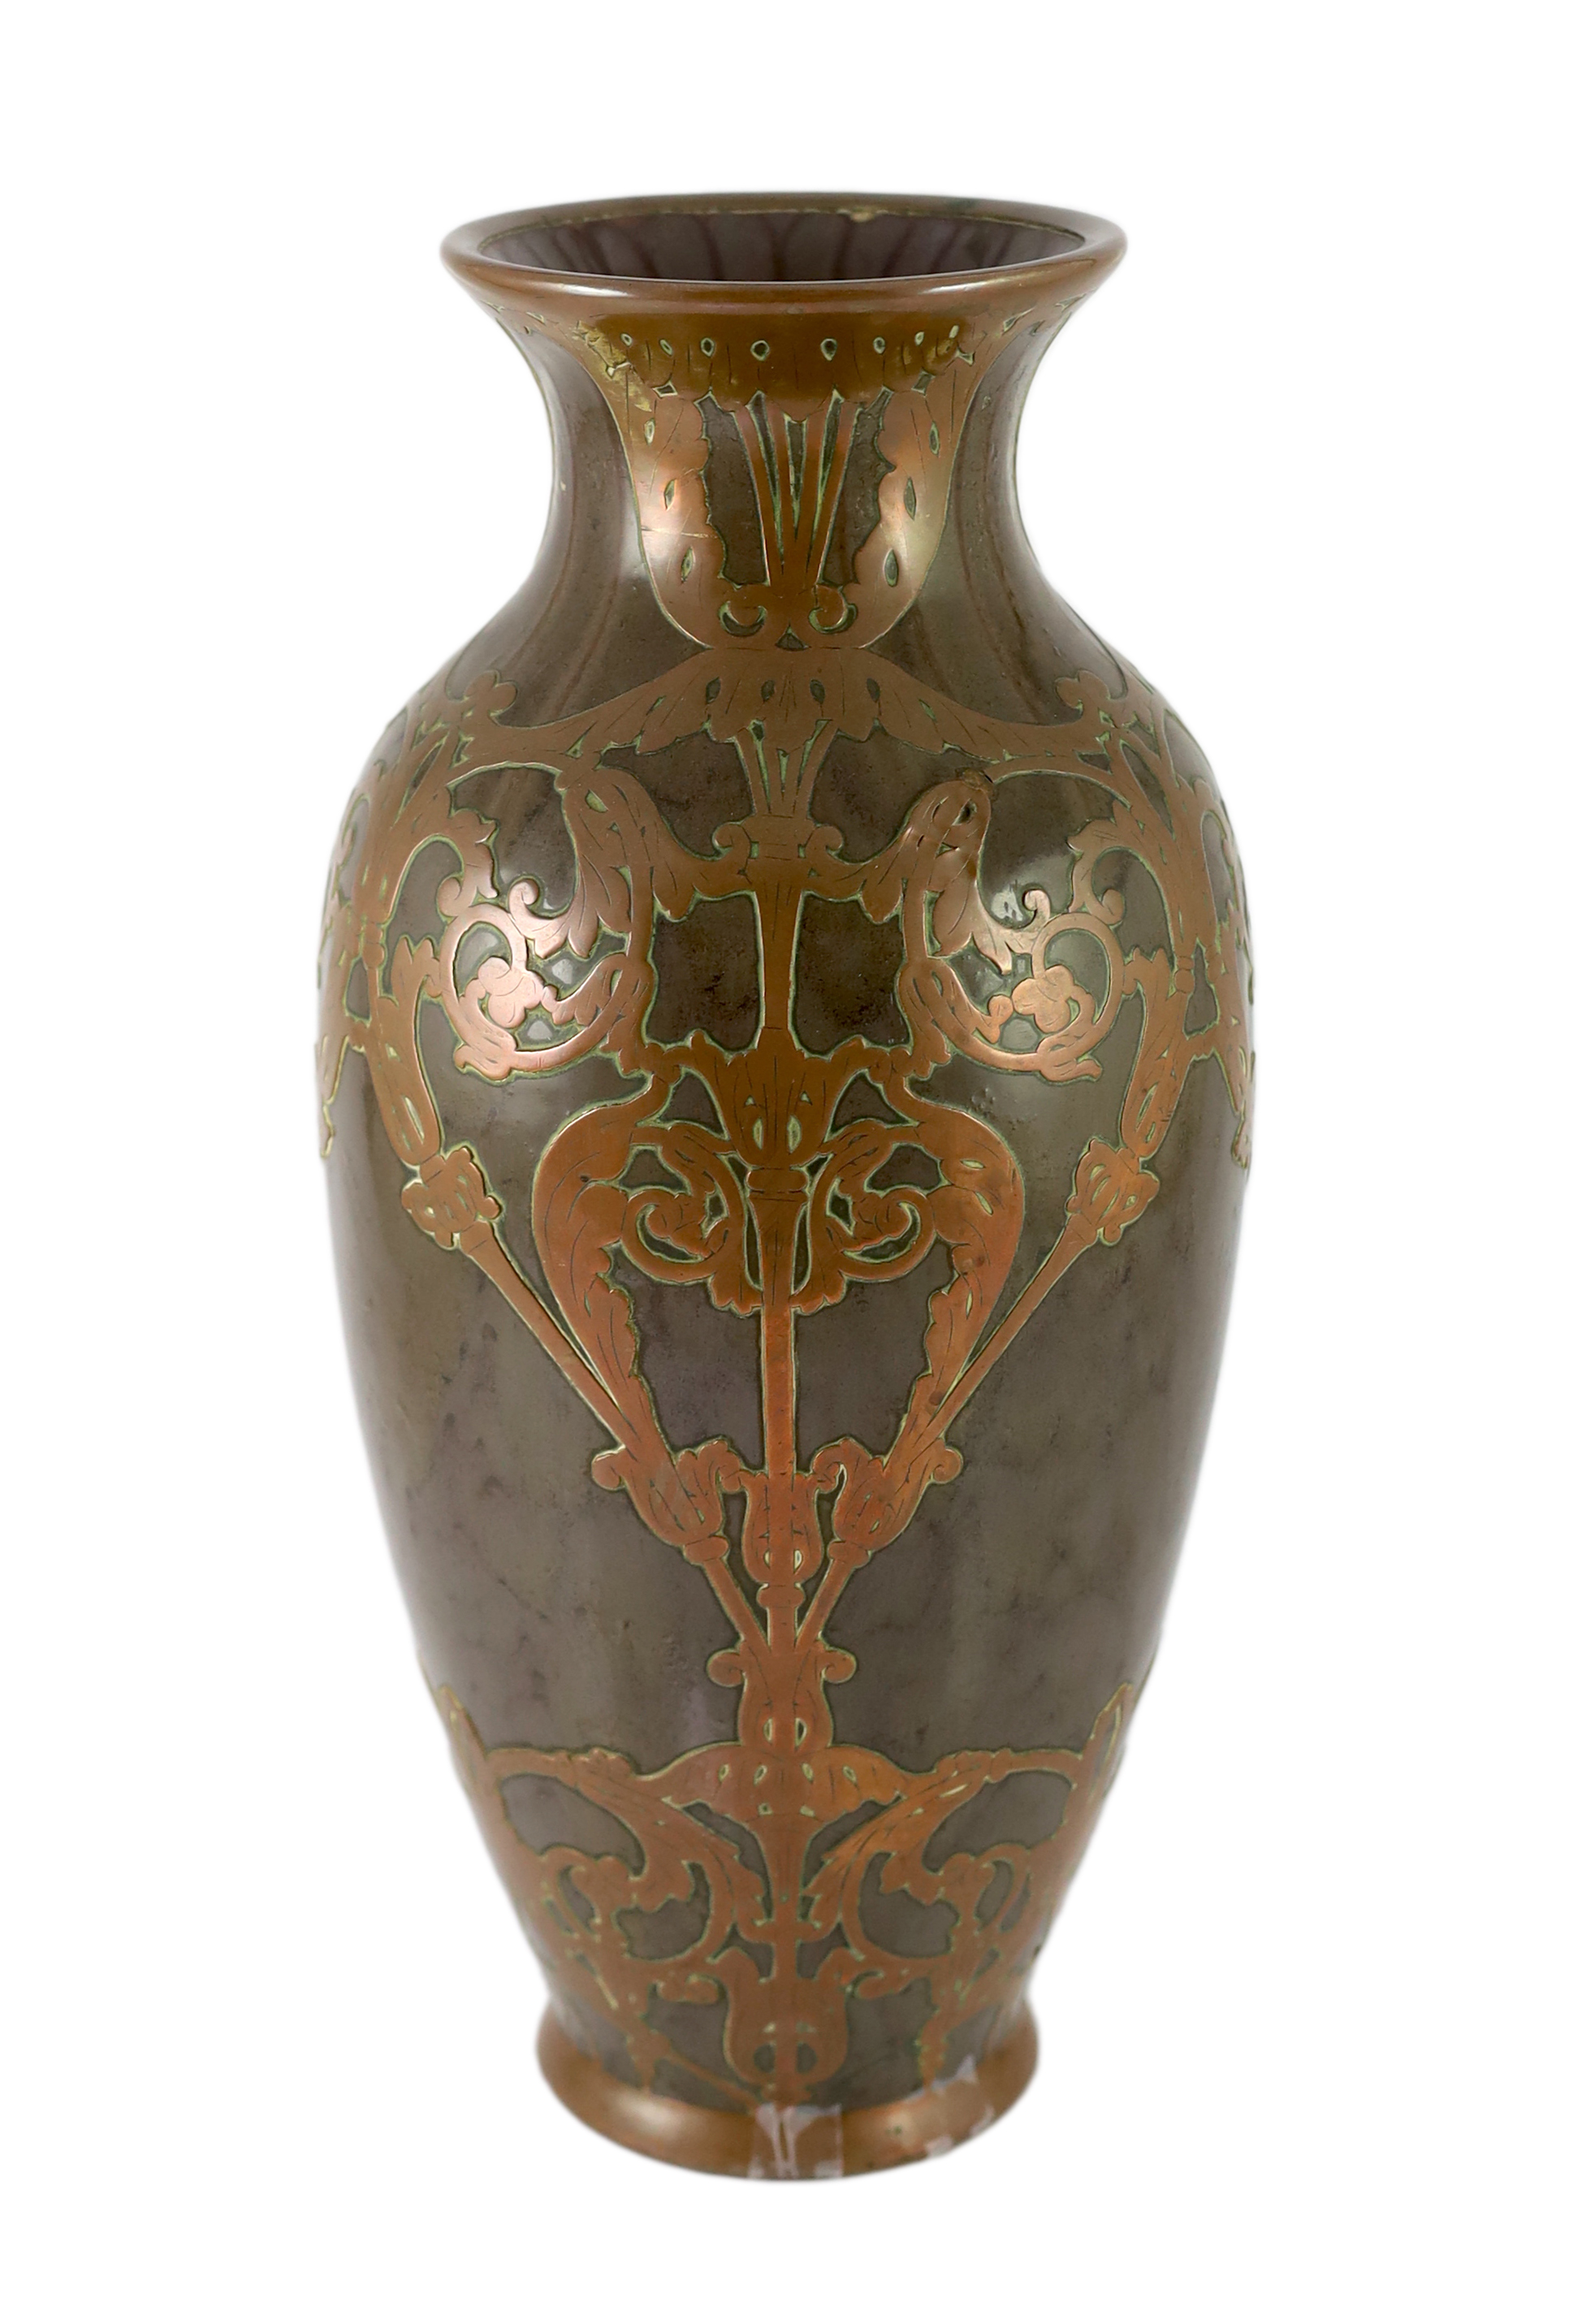 Attributed to Peter Behrens (German, 1868-1940). An Art Nouveau pottery and copper overlaid vase by Marzi & Remy, Hohr                                                                                                      